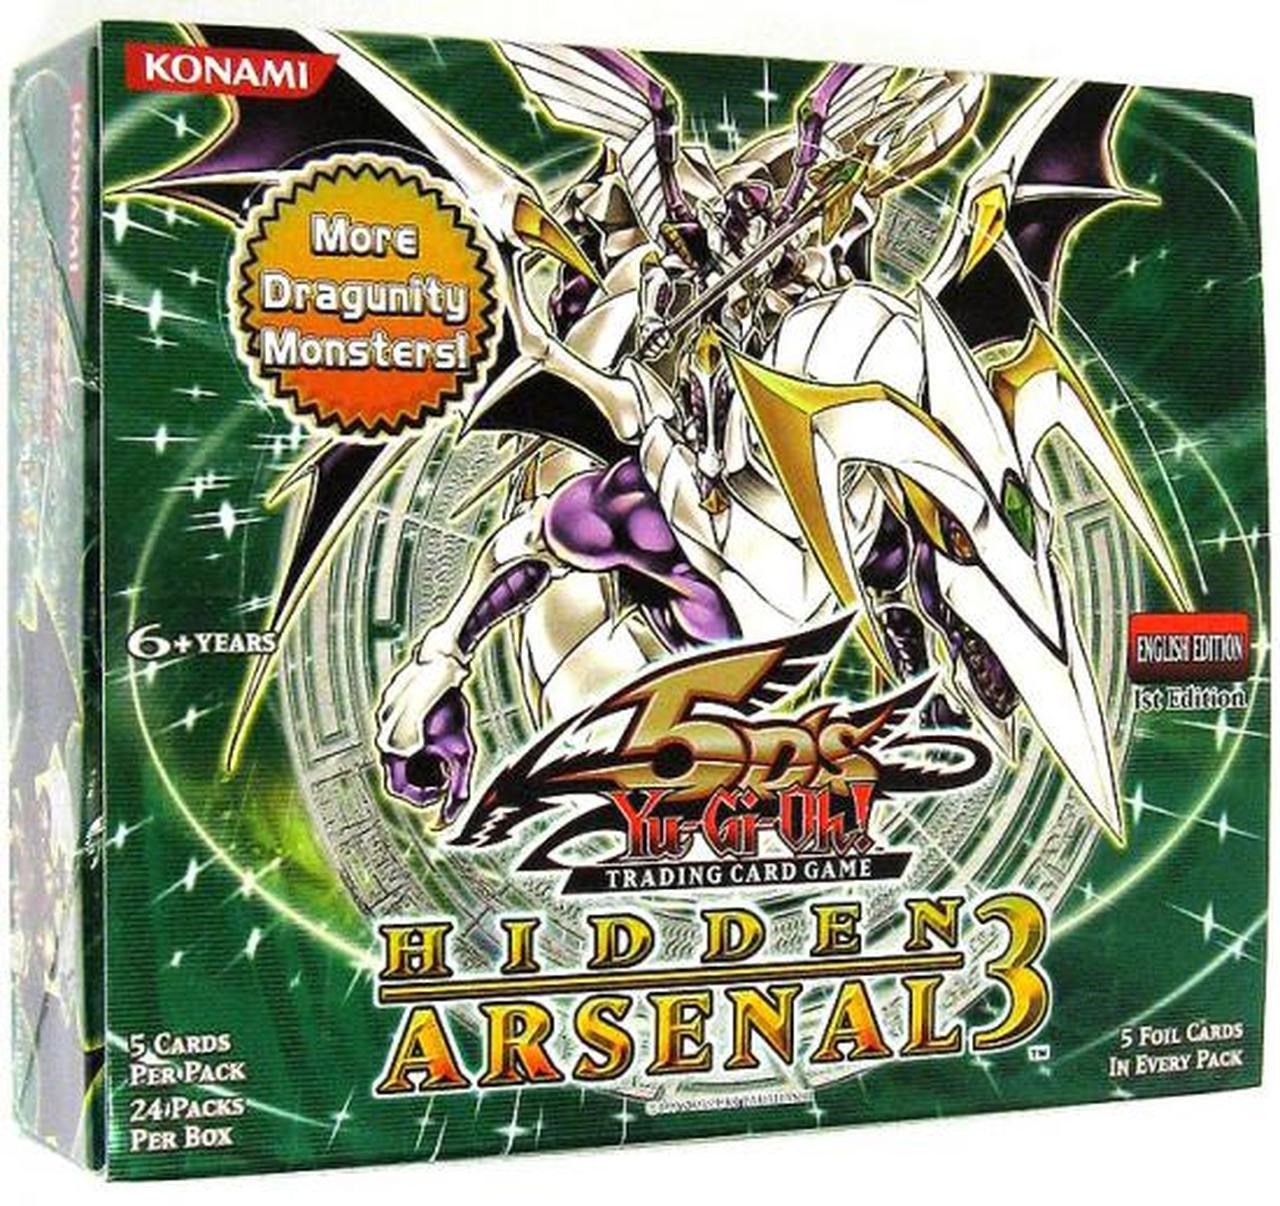 Yugioh Hidden Arsenal 3 1st Edition Booster Pack for sale online 